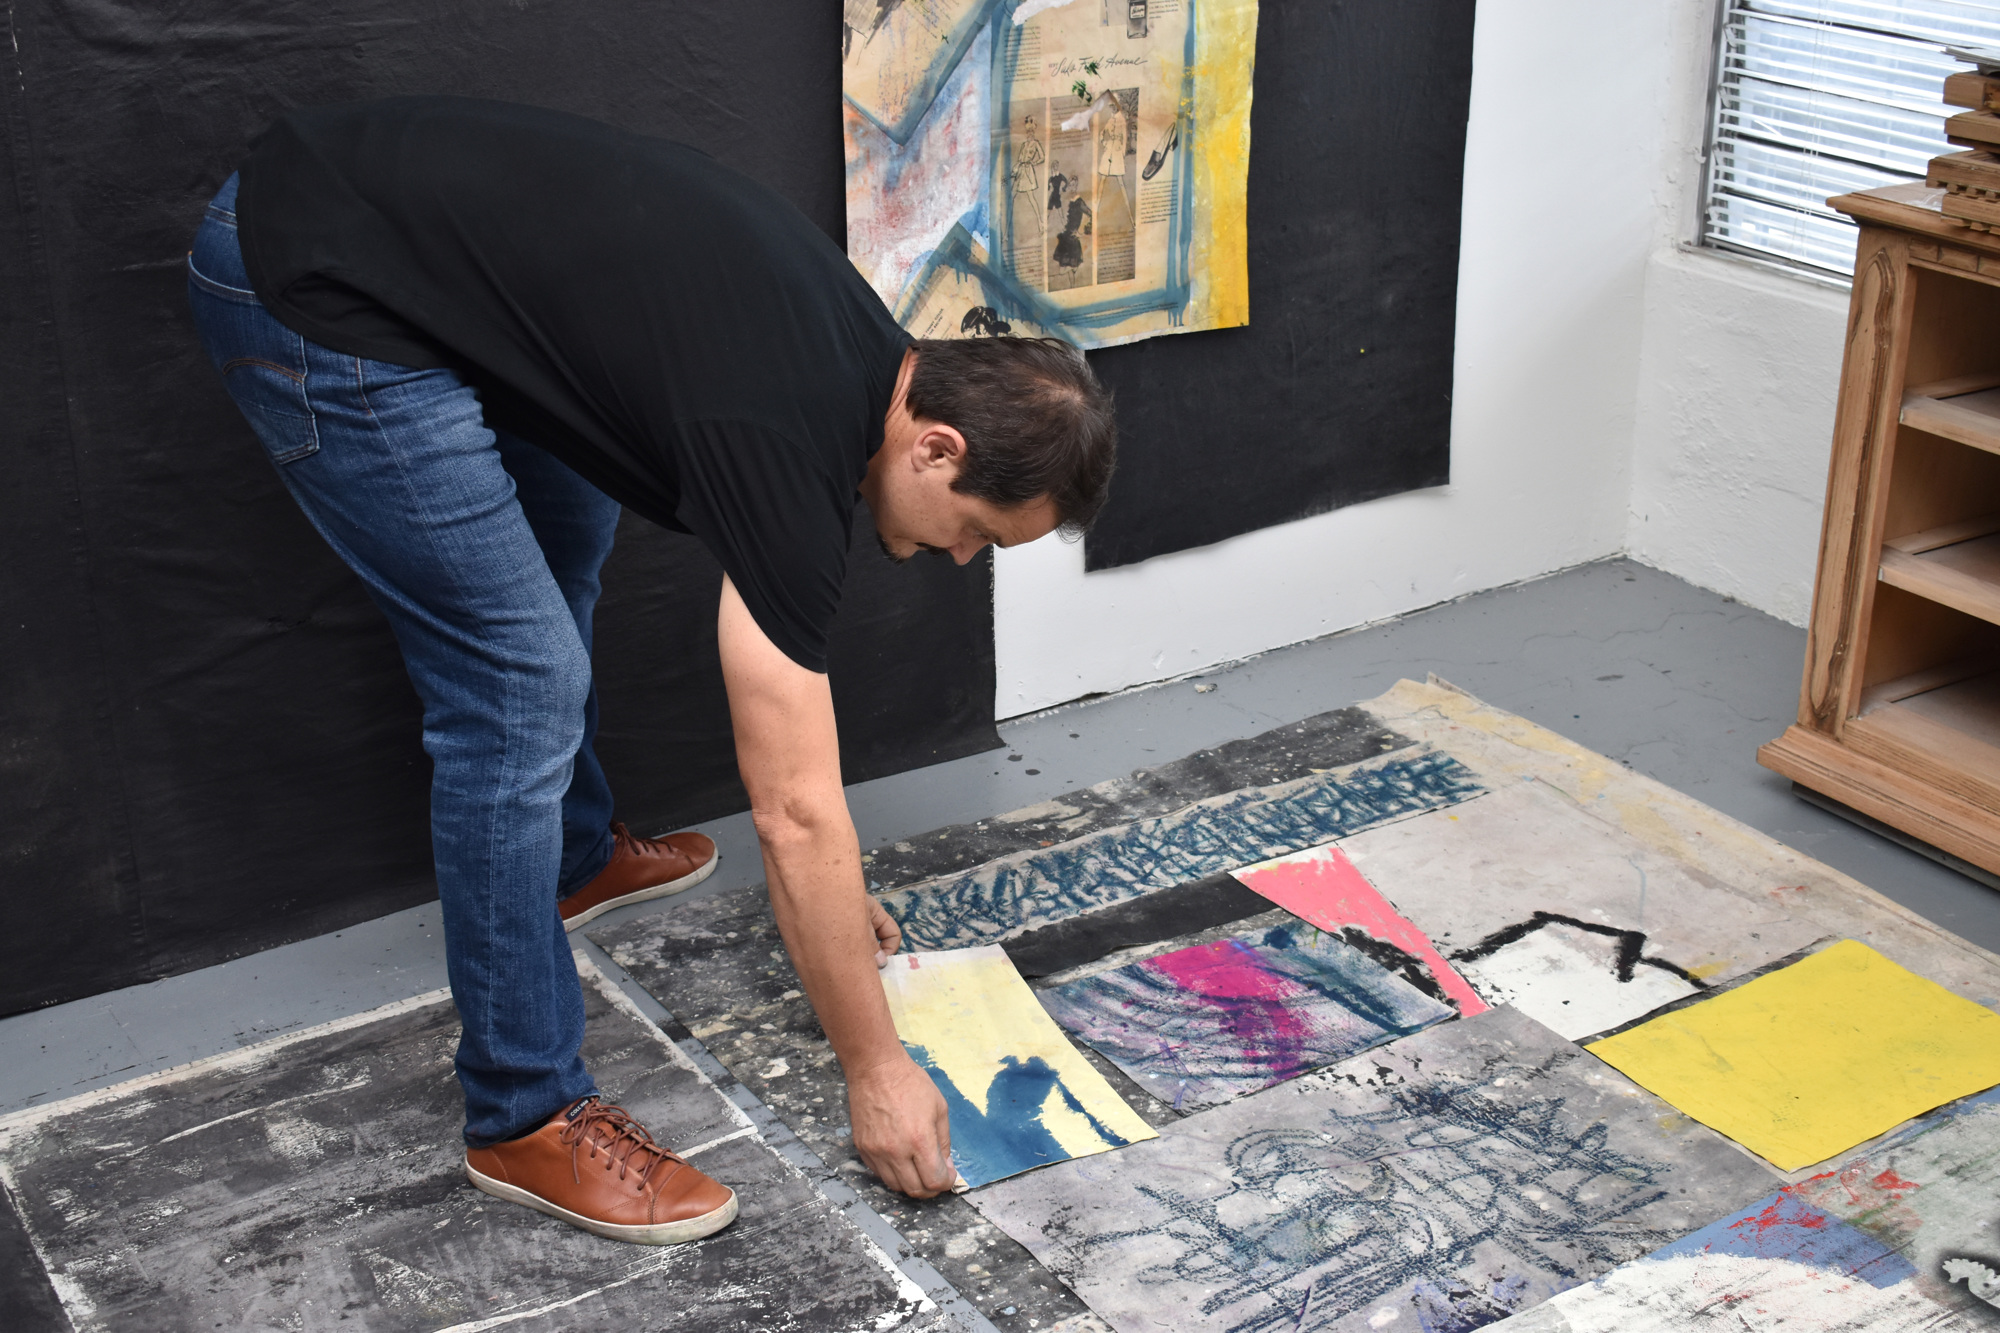 Jozef Batko likes to arrange the pieces of his works on the floor before hanging them. Photo by Niki Kottmann